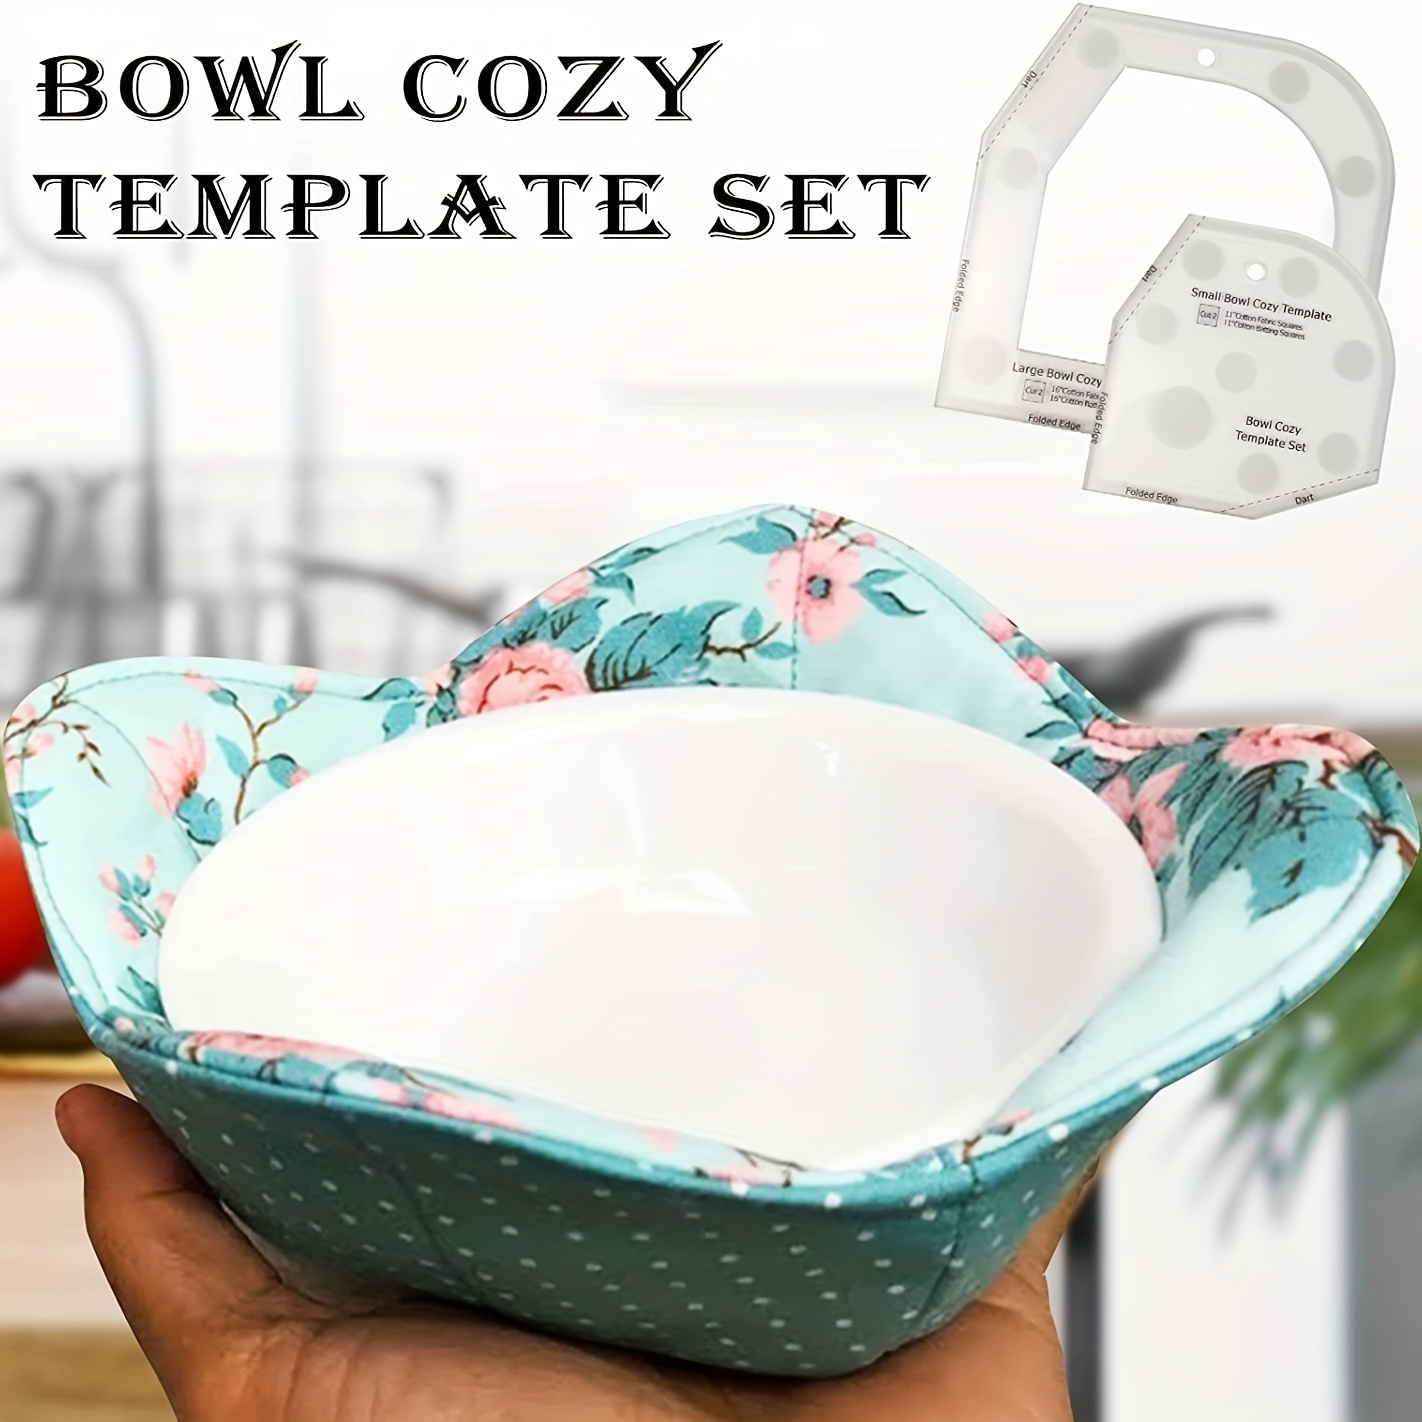 Bowl Cozy Template Cutting Ruler Set for Quilting Bowl Cozy Clear Acrylic  Bowl Wrap Sewing Pattern